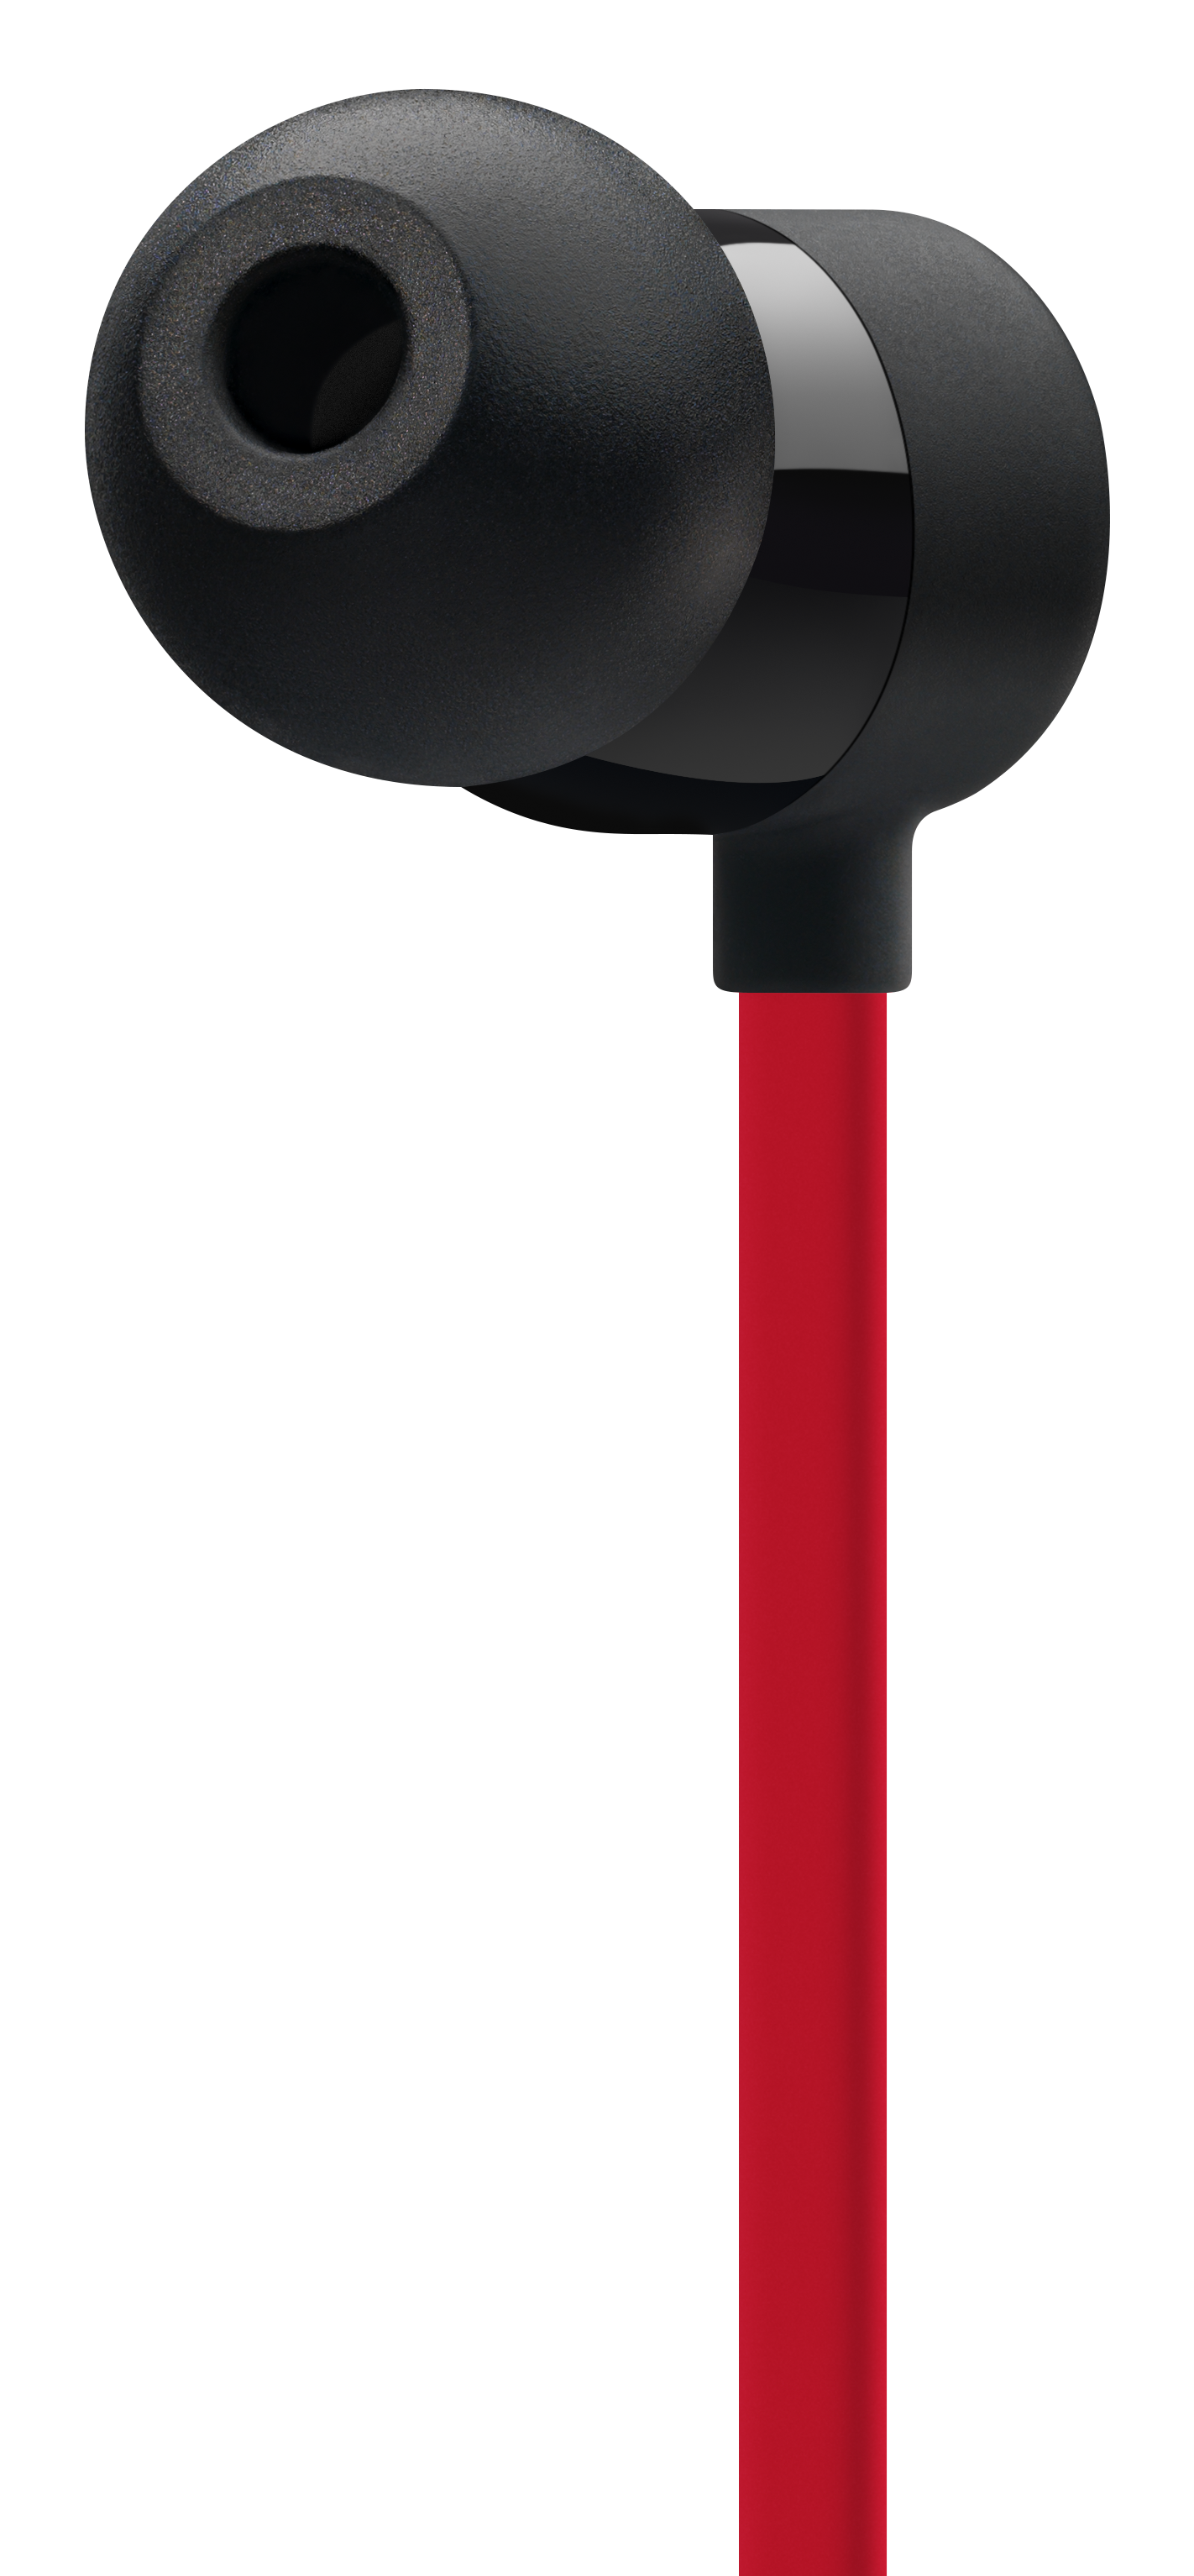 urBeats3 Earphones with Lightning Connector - The Beats Decade Collection - Defiant Black-Red